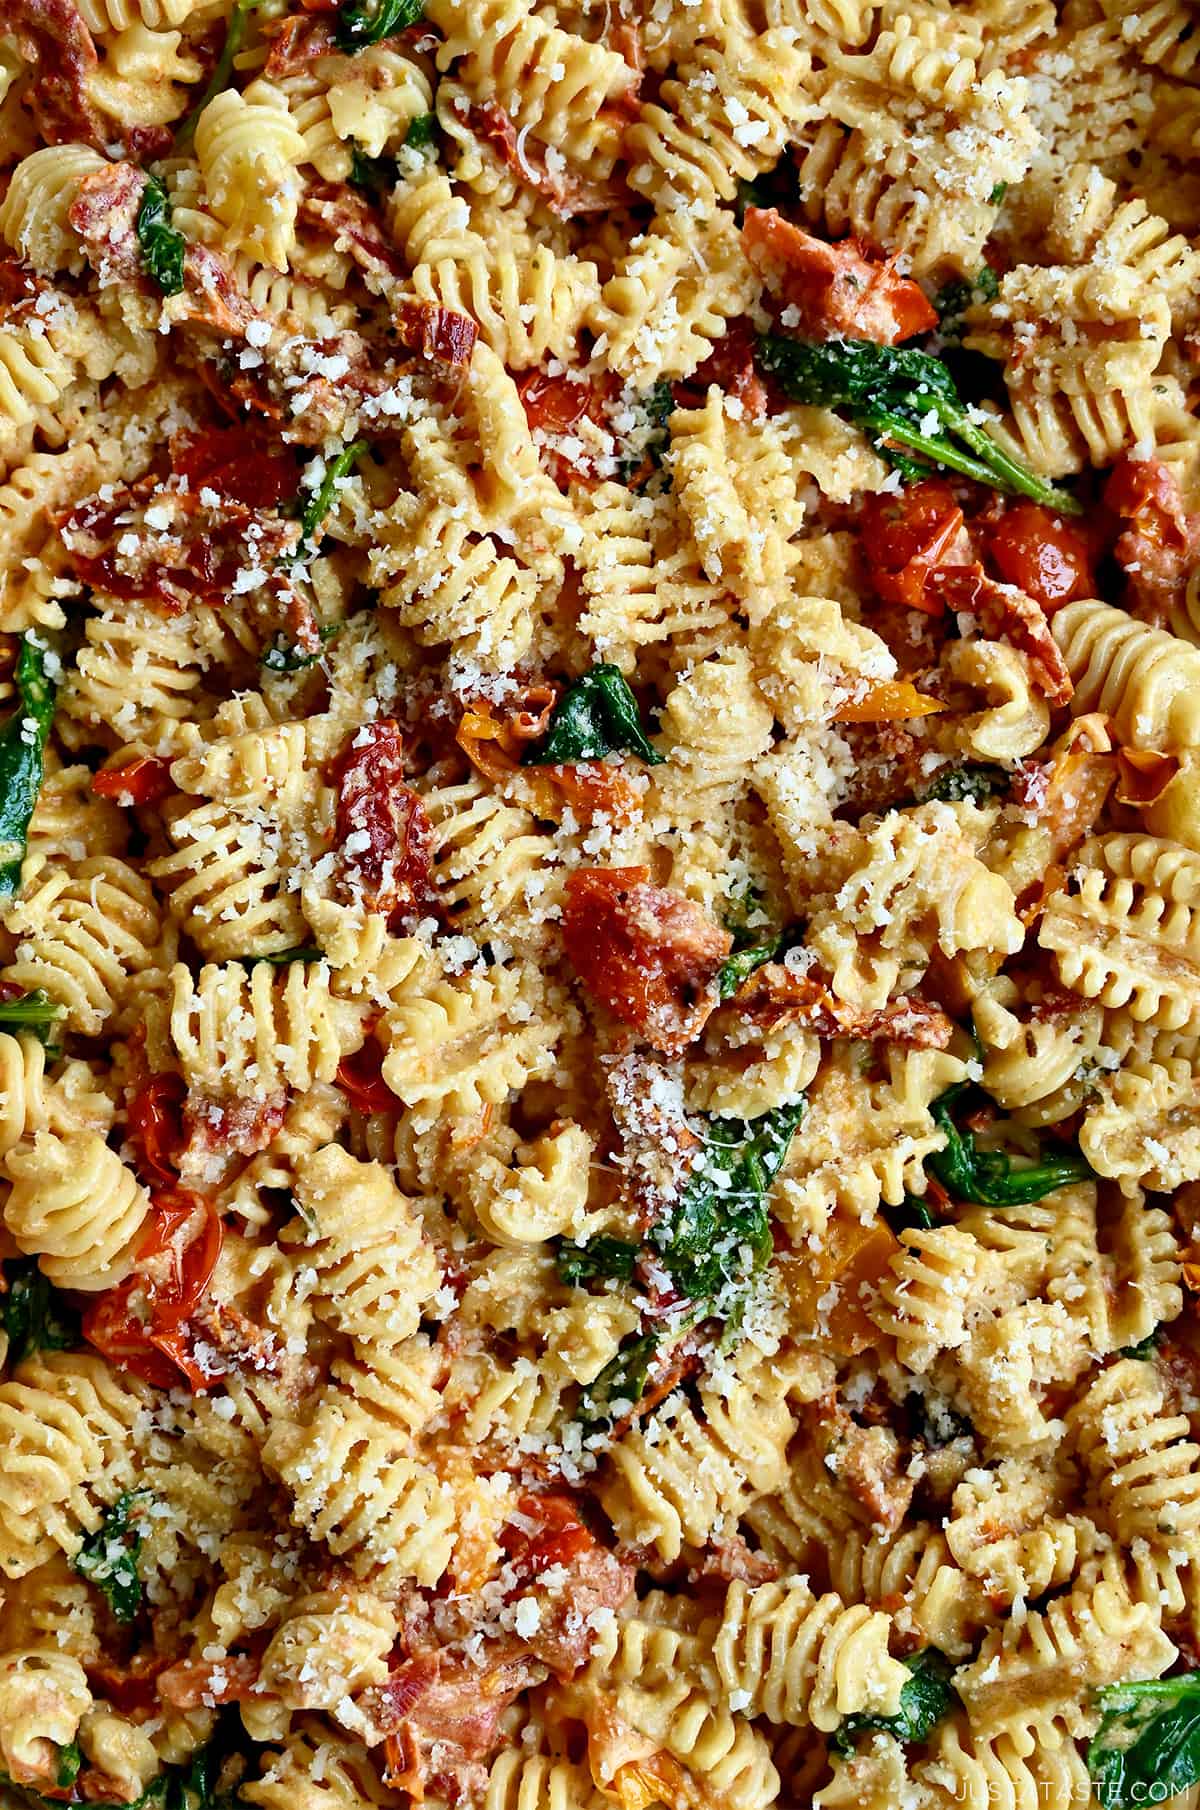 A close-up view of short pasta noodles with sun-dried tomatoes, roasted cherry tomatoes and spinach garnished with parmesan cheese.